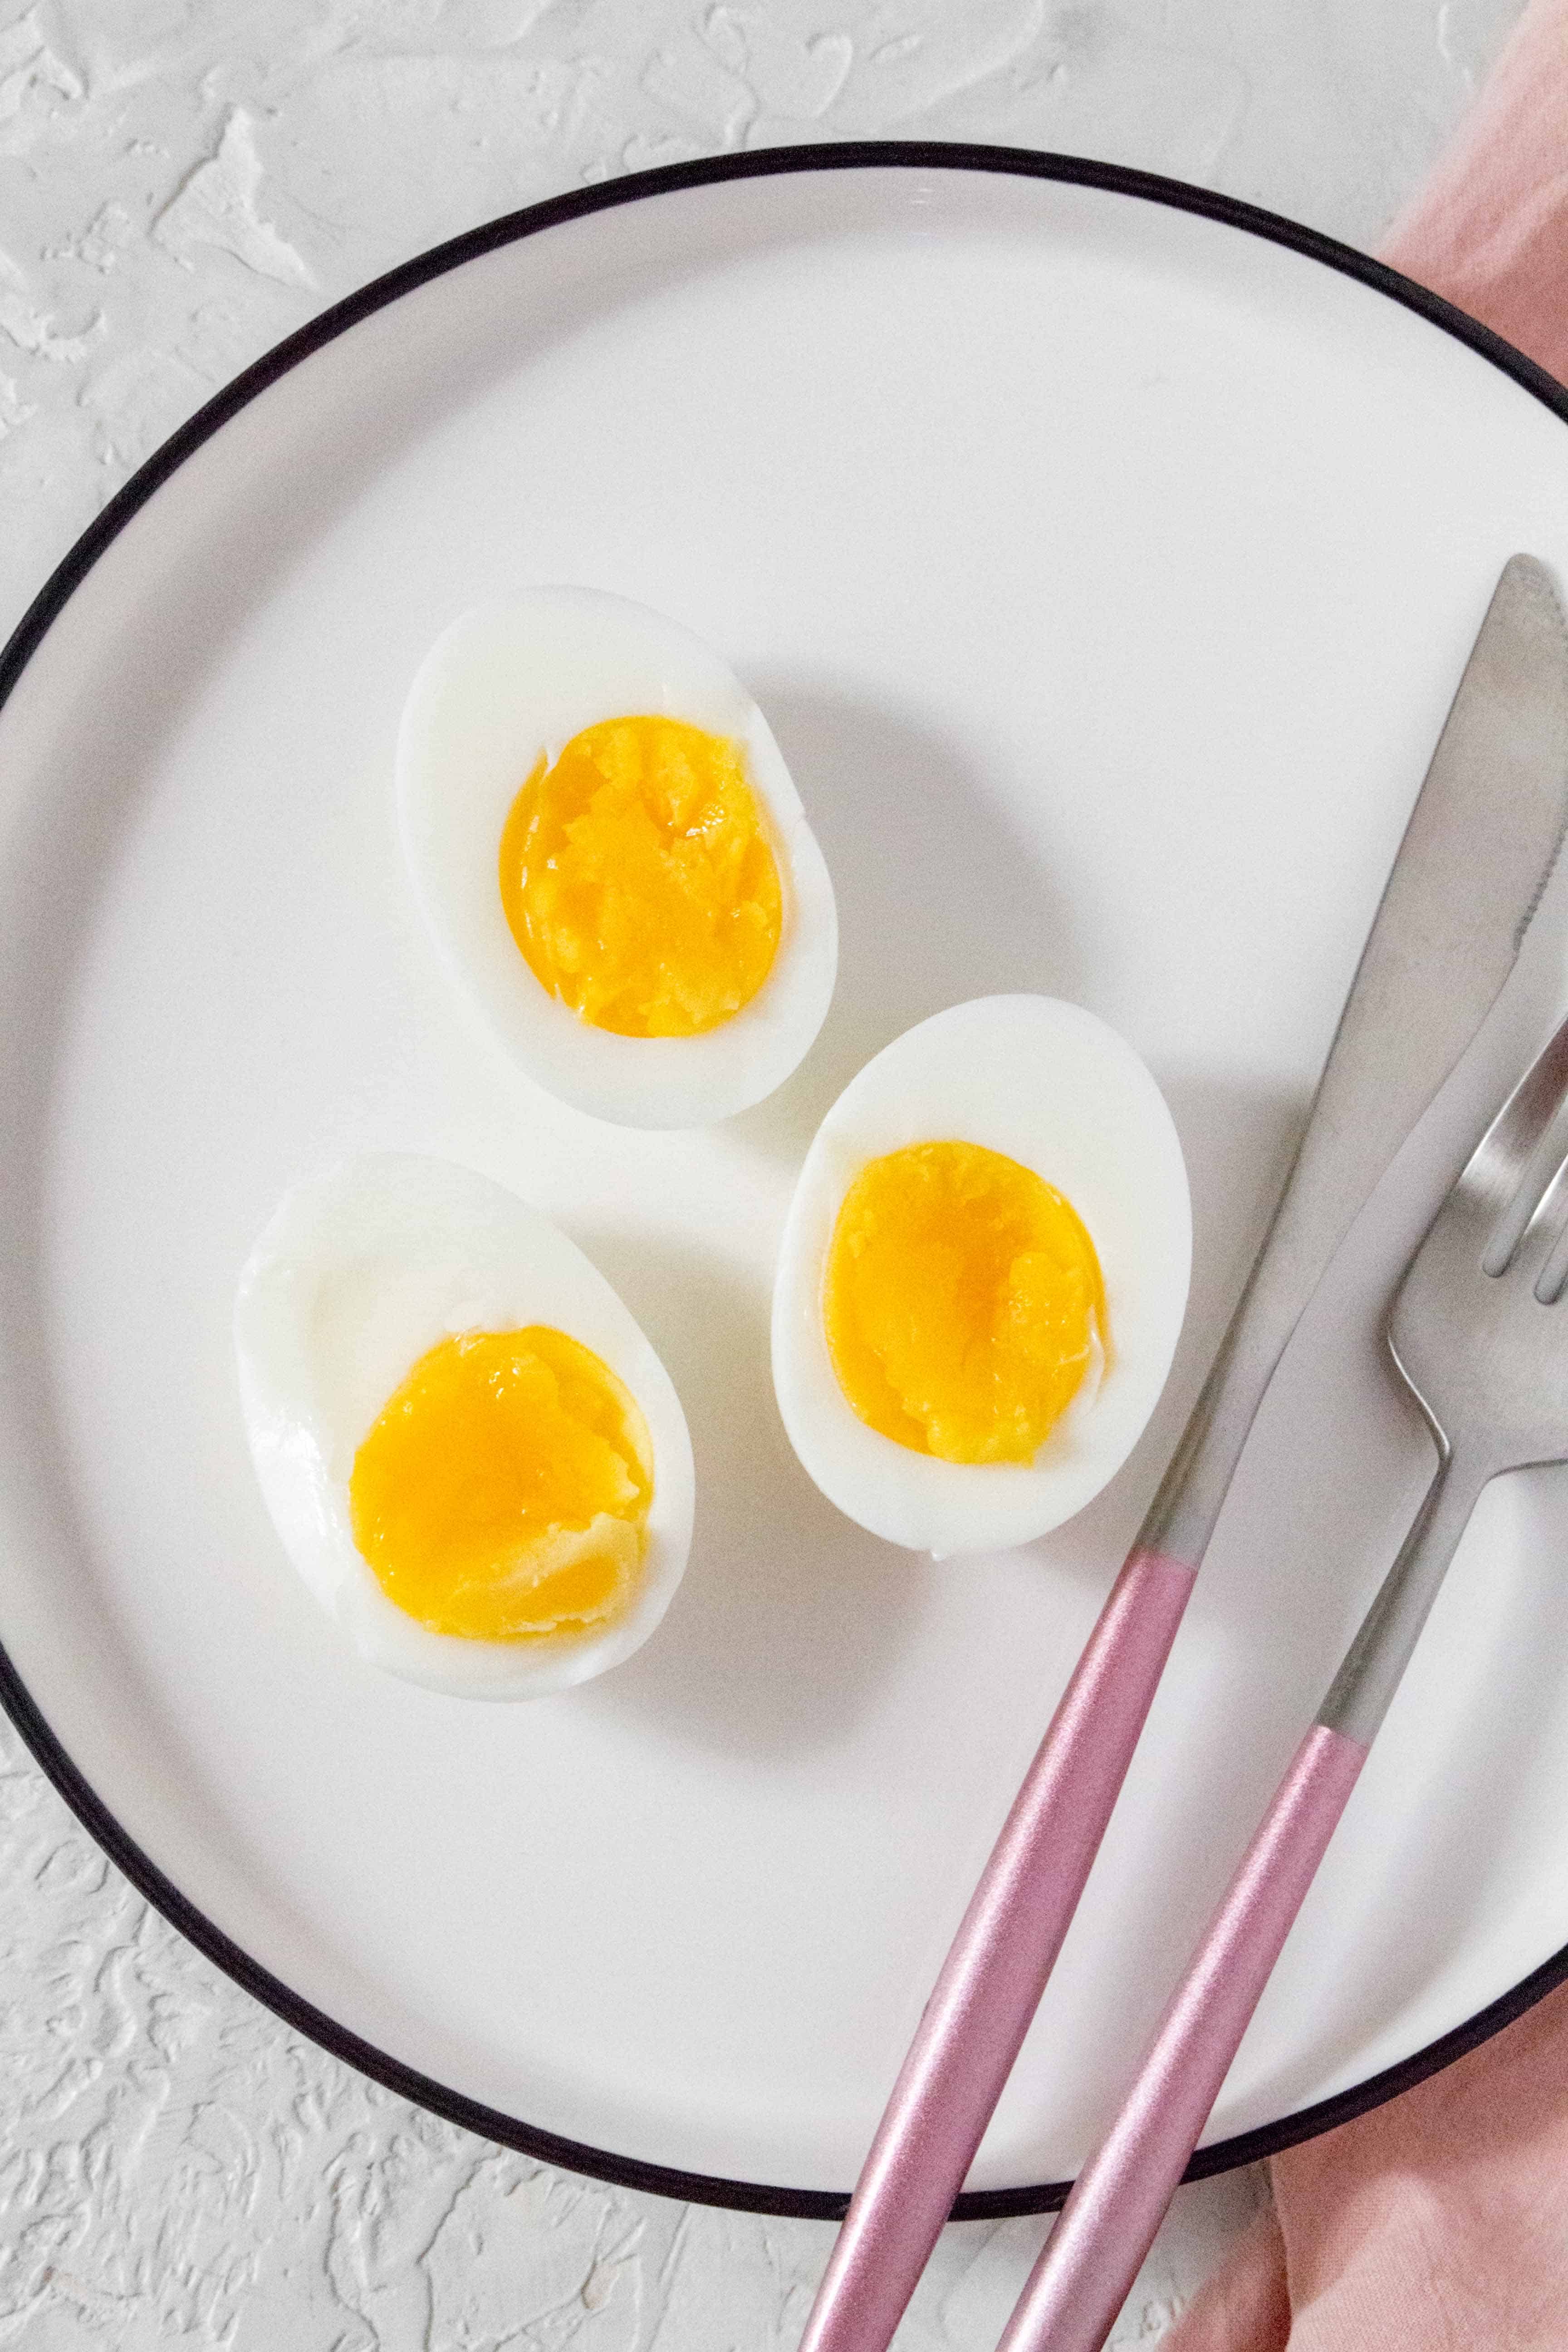 These easy peel no boil Air Fryer Hard Boiled Eggs are going to make your weekly meal prep so much easier!